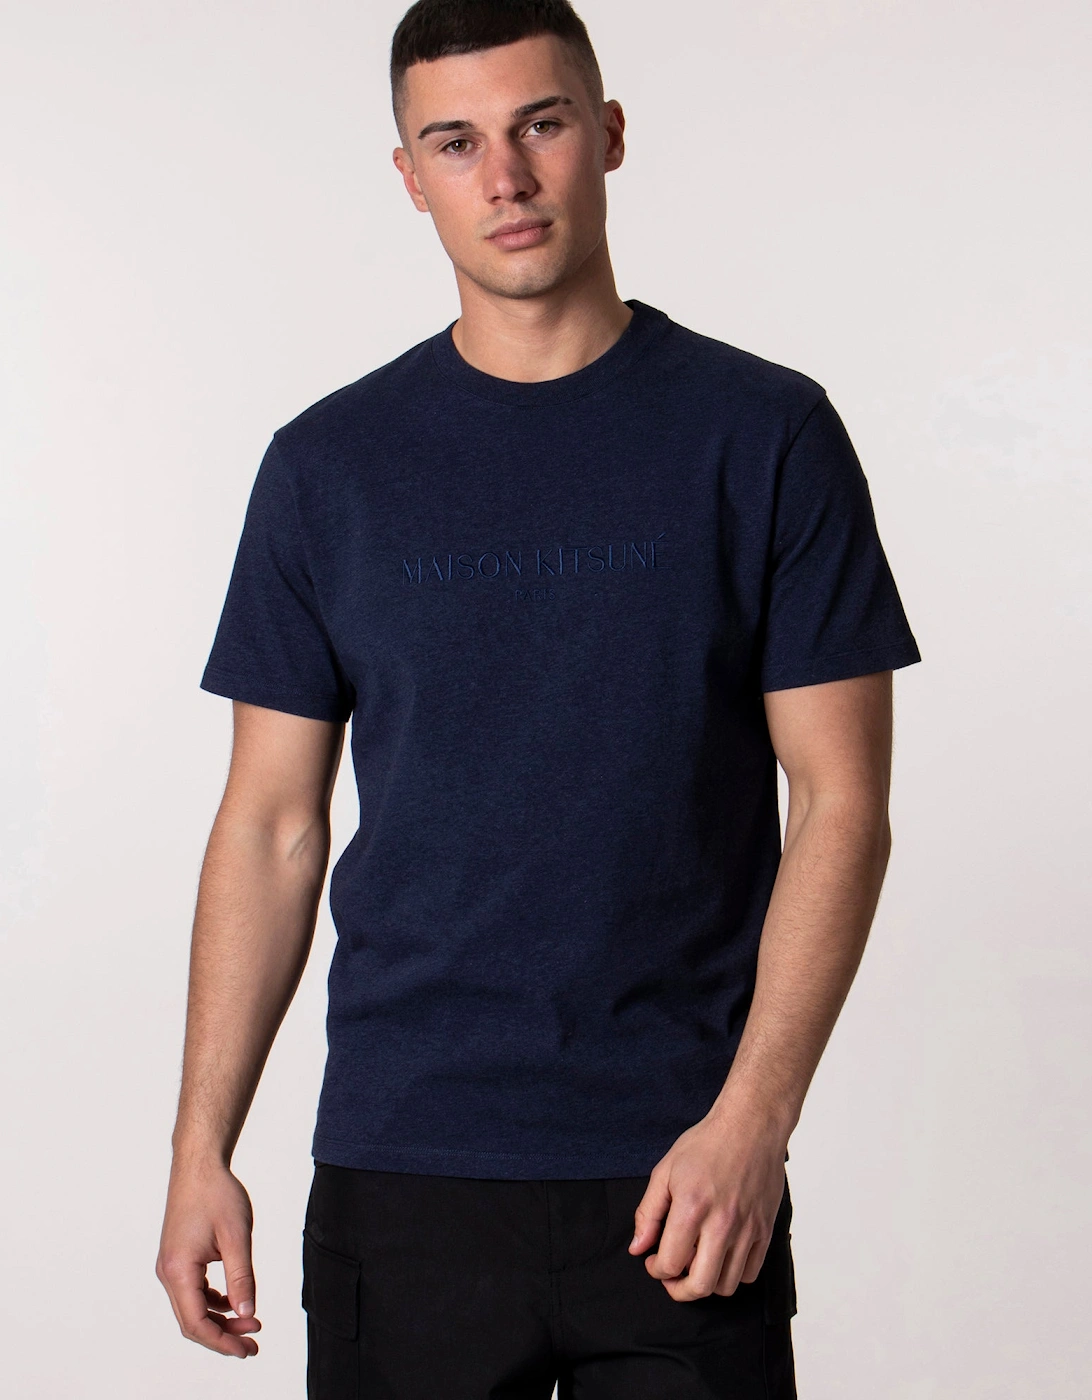 Men's Slim Fit Embroidery Classic T-Shirt - H481 Shirt Navy Melange- [Size: L only]